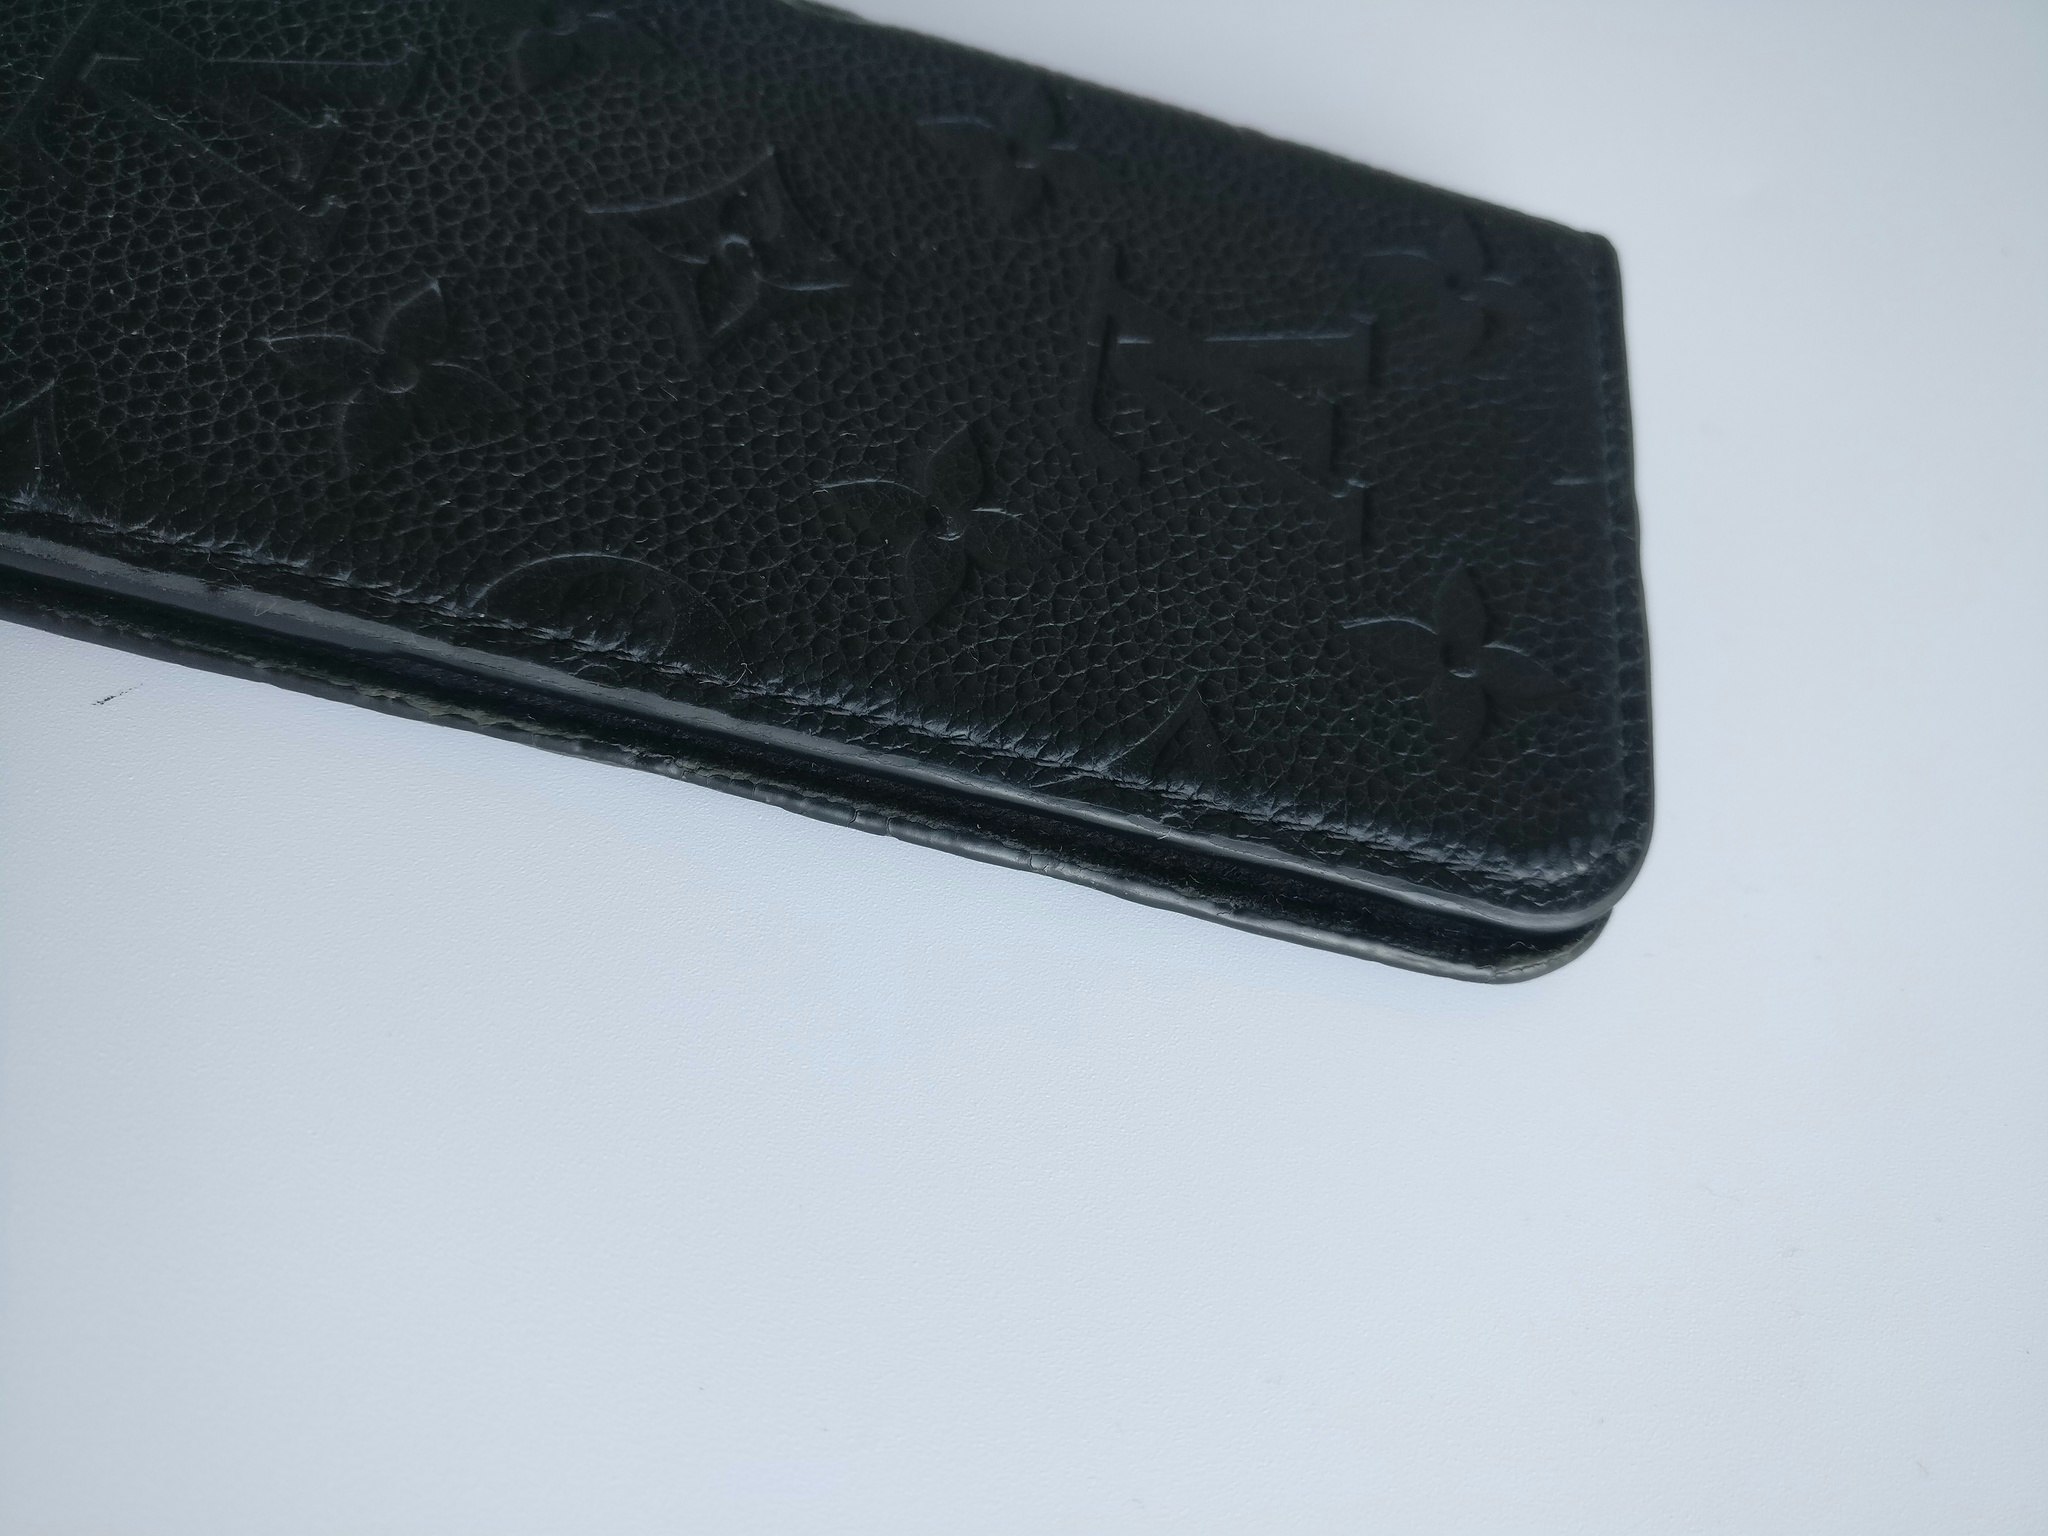 Louis Vuitton Monogram iPhone XR Case ○ Labellov ○ Buy and Sell